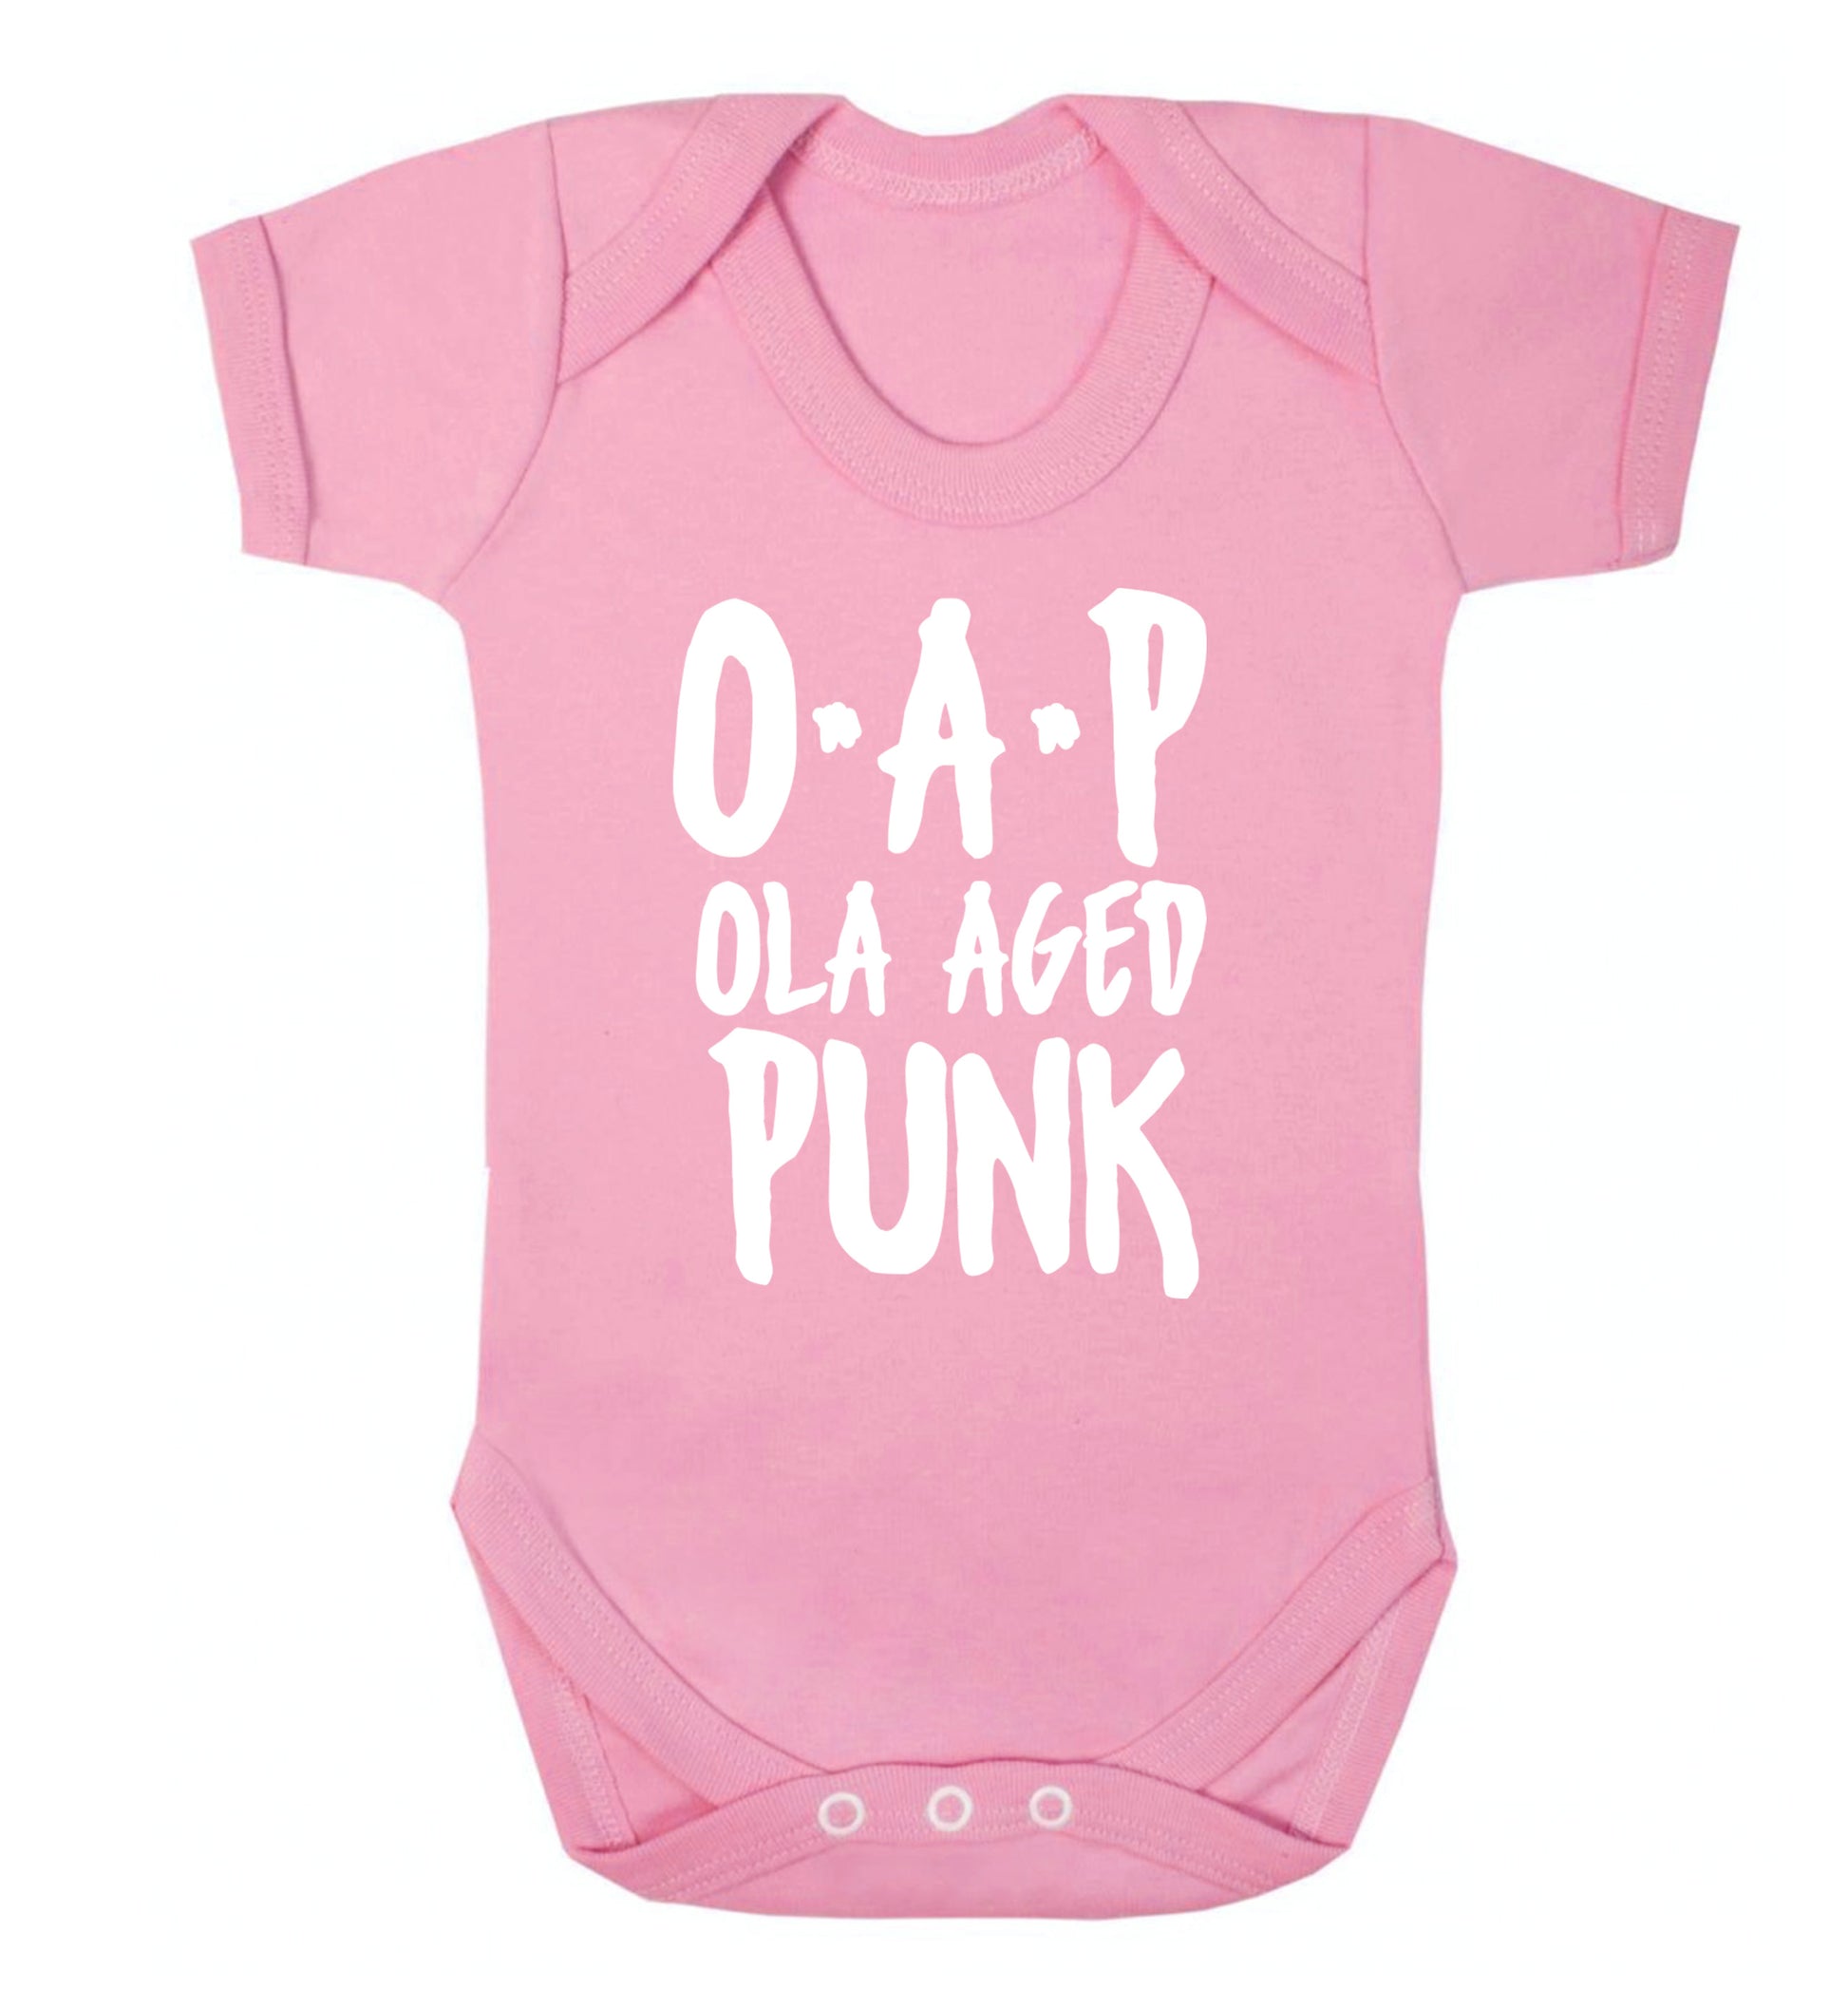 O.A.P Old Aged Punk Baby Vest pale pink 18-24 months